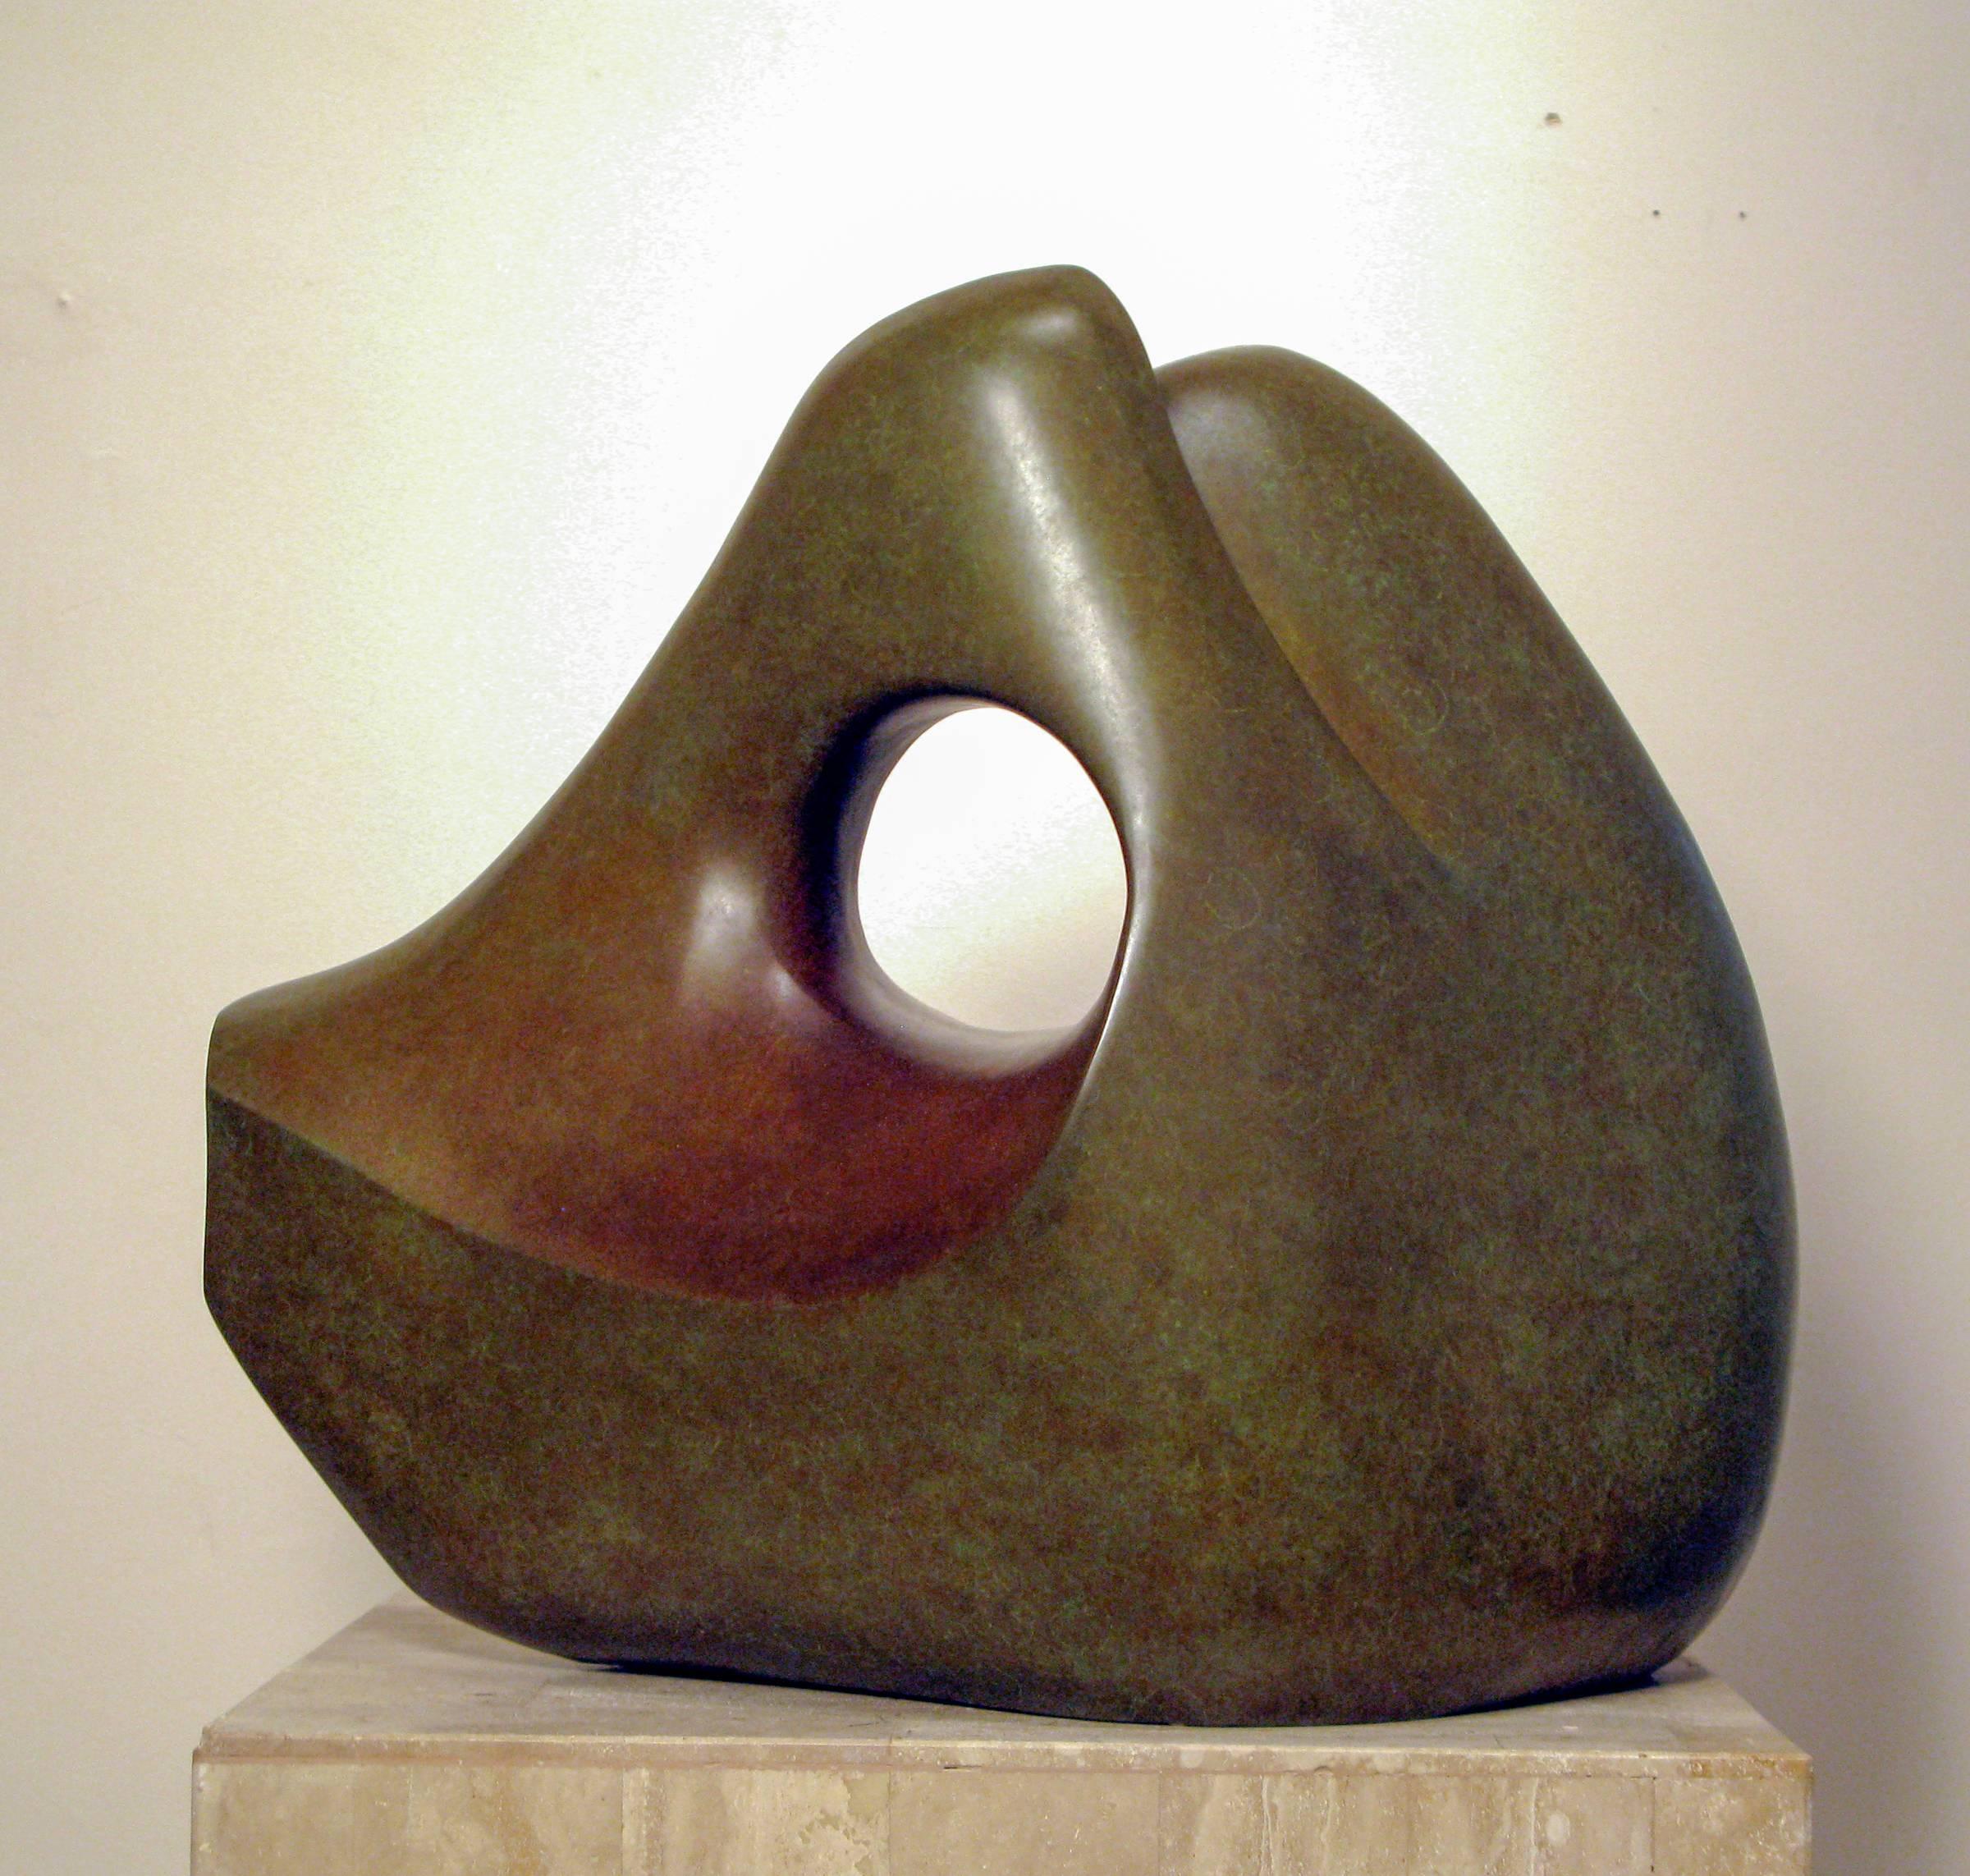 his sculpture “offering of the sacred pipe” is on display in nyc.